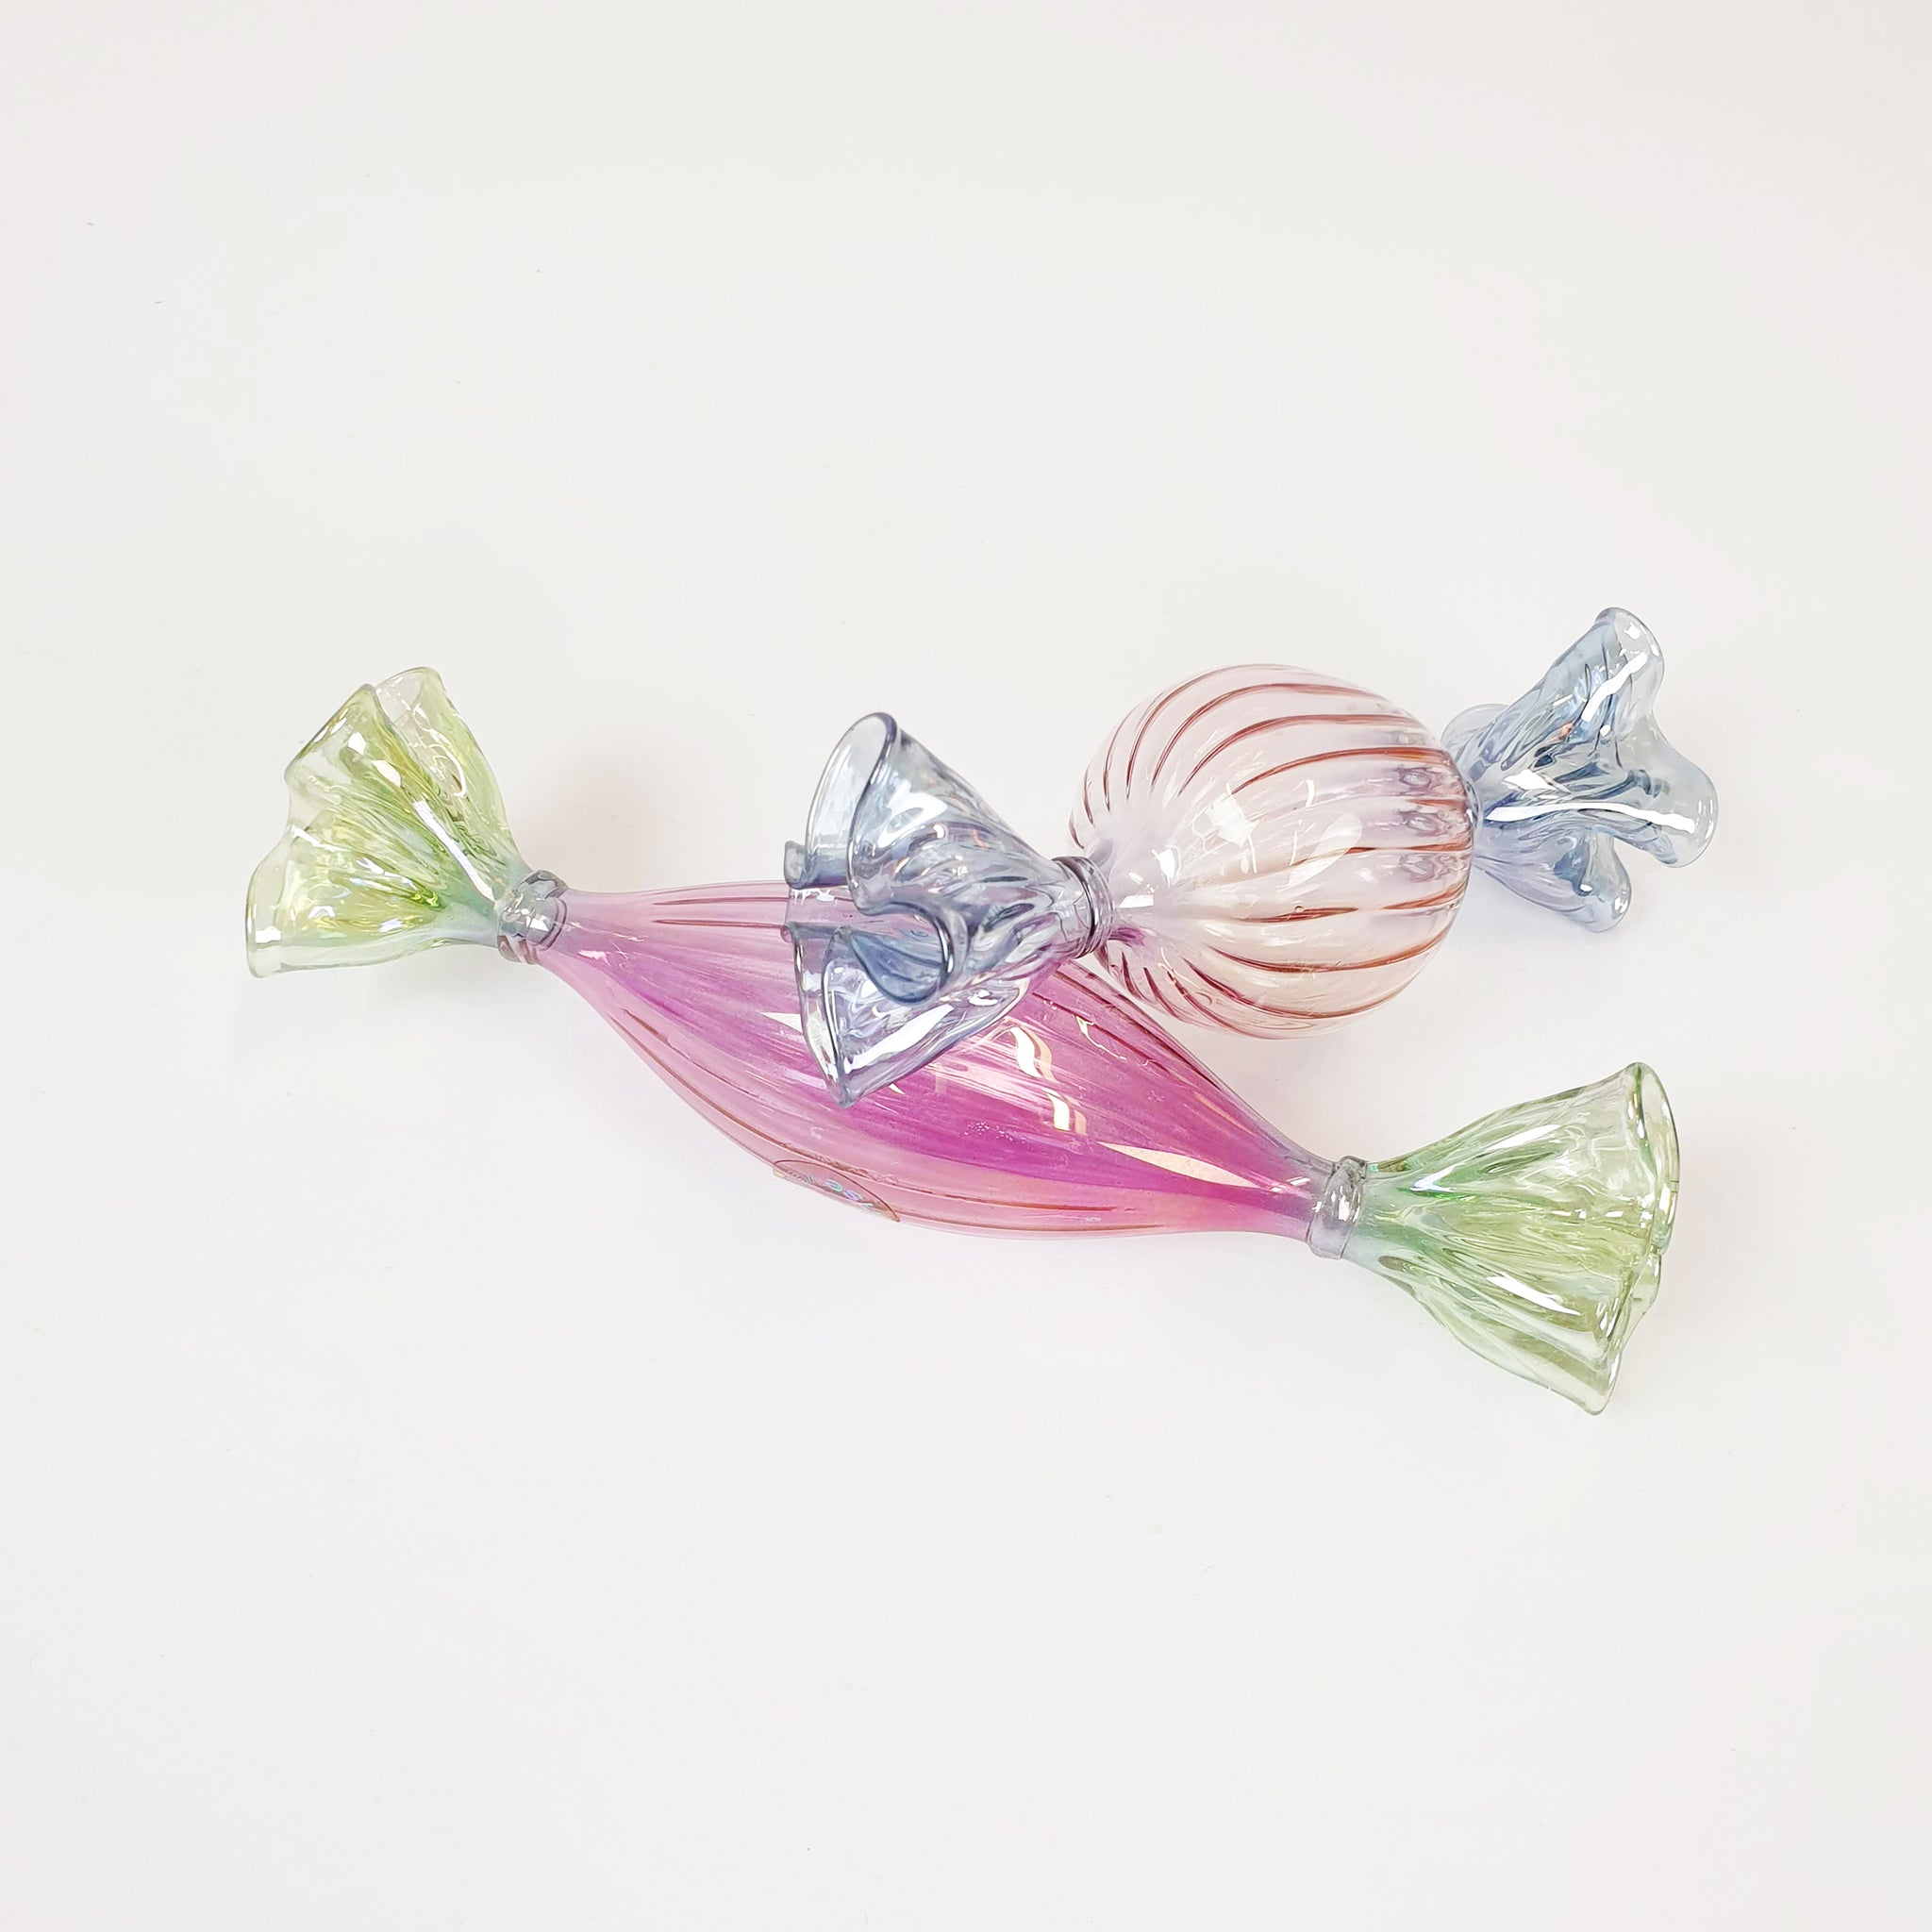 1970s glass candies by Parise Vetro